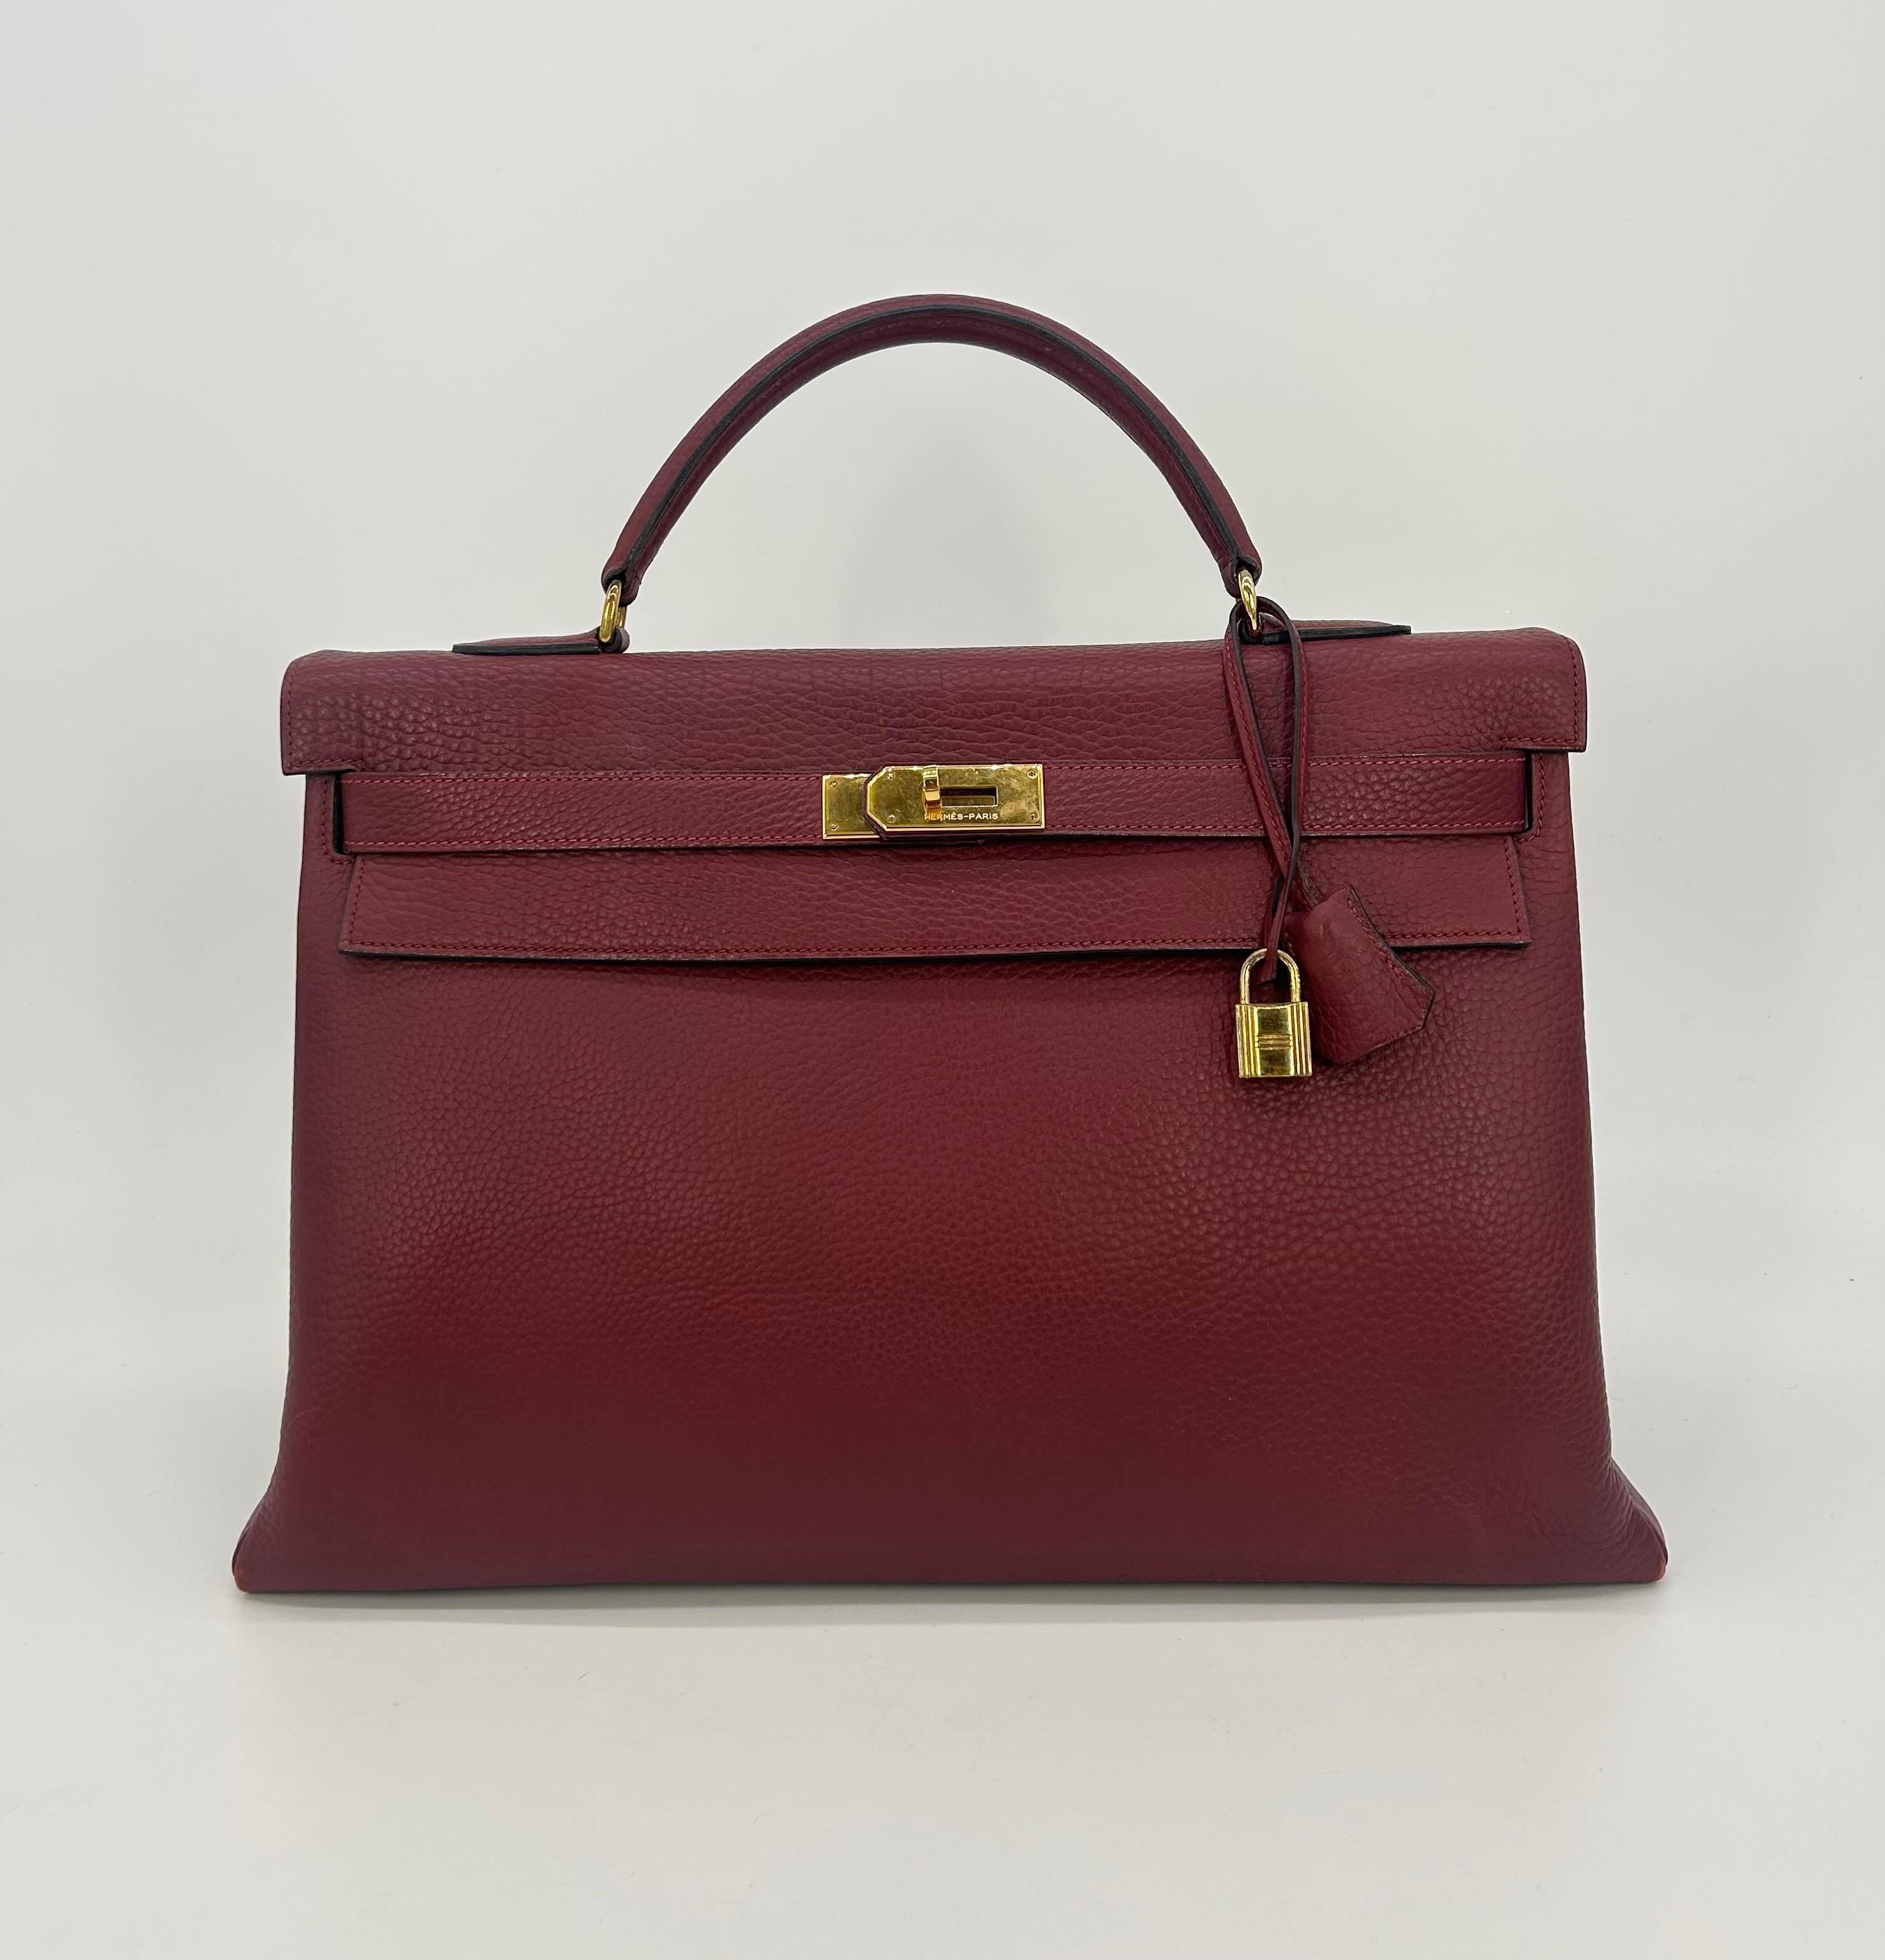 Hermes Rouge Clemence Leather Kelly 40 in good condition. Rouge Clemence leather exterior trimmed with gold hardware. Signature front twist lock double strap top flap Kelly closure opens to a matching rouge kidskin lined interior with 2 slit and one